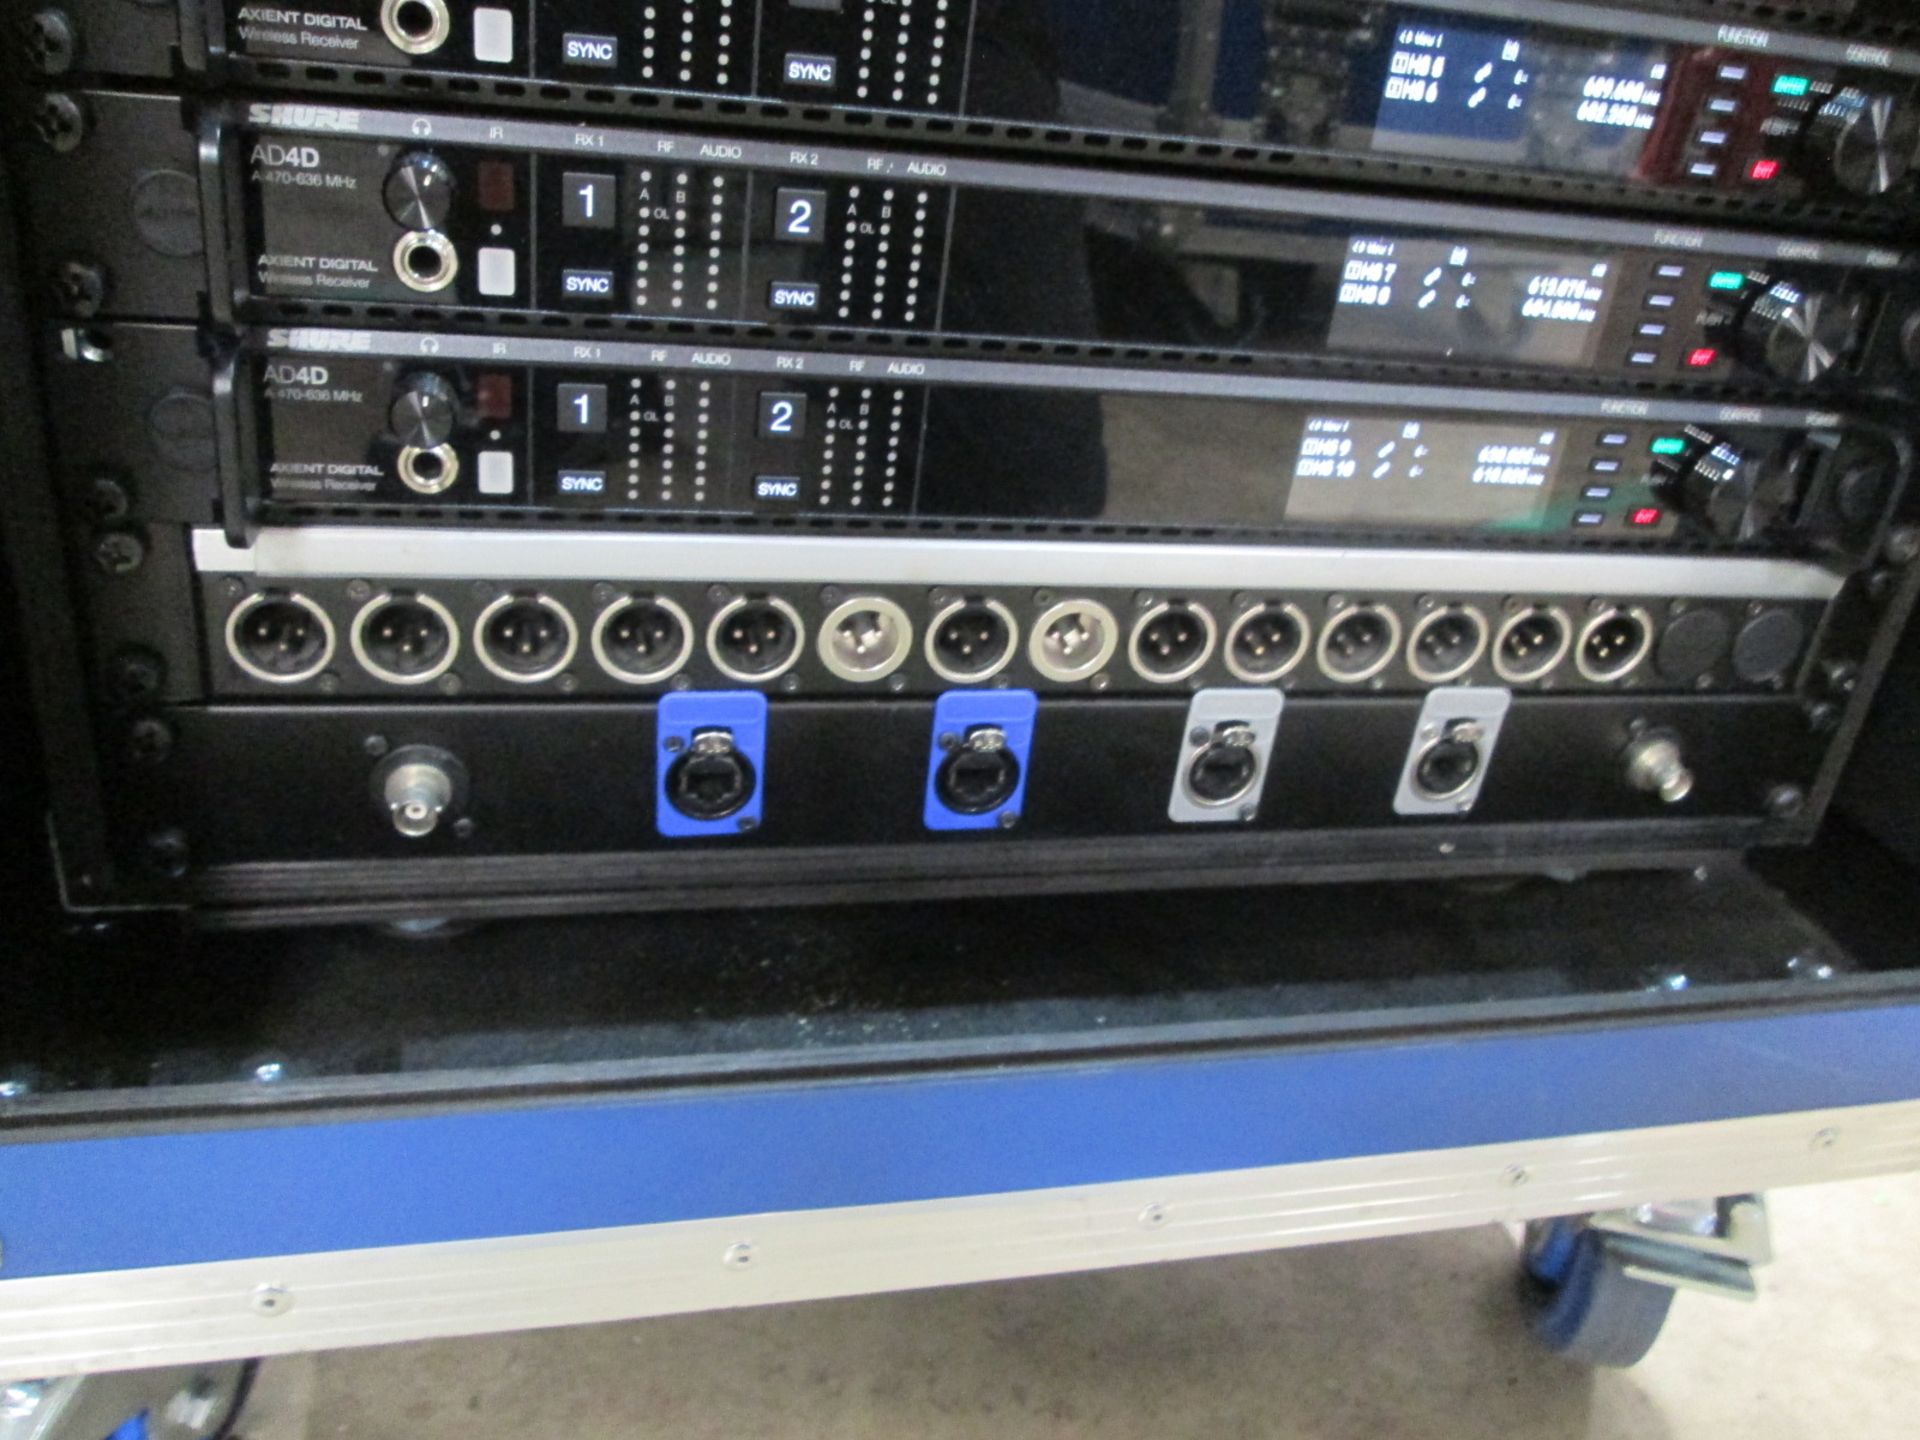 Shure Axiant Digital Radio Rack. To include 5 x AD4D 2 channel digital receivers (470.636 MHz), 4 - Image 5 of 12